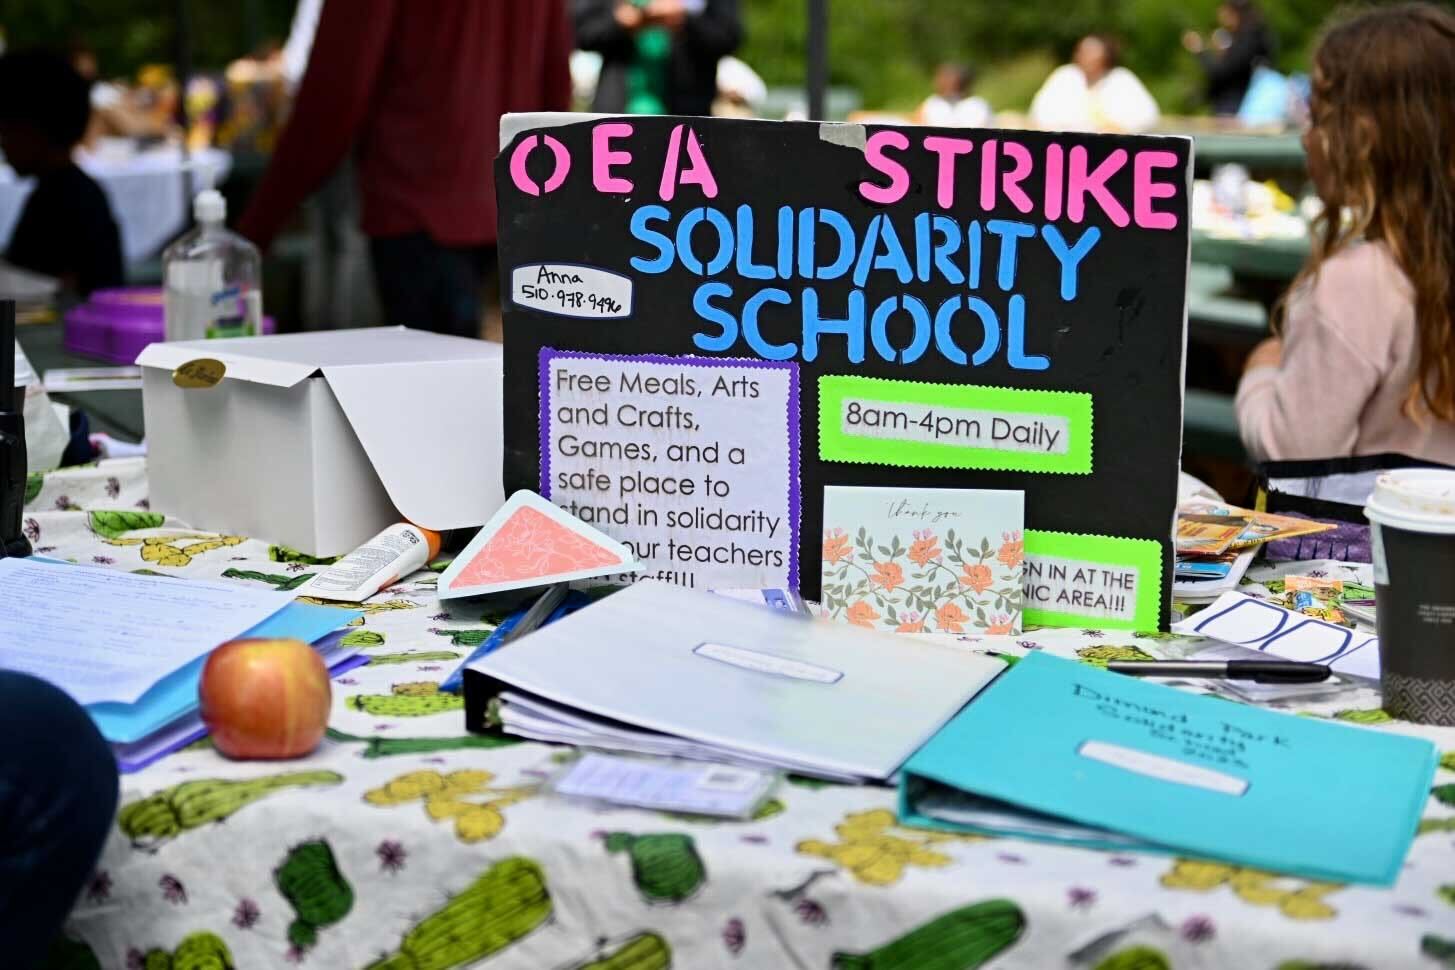 A black sign with pink and blue writing sits on a table at a park. The sign reads, "OEA Strike Solidarity School." It also reads, "Free meals, arts and crafts, and a safe place to stand in solidarity with our teachers and staff!" There is a single apple on the table, along with blue and white, three-ring binders. A white pastry box and a bottle of hand sanitizer are also on the table. Parents and children are blurry in the background.